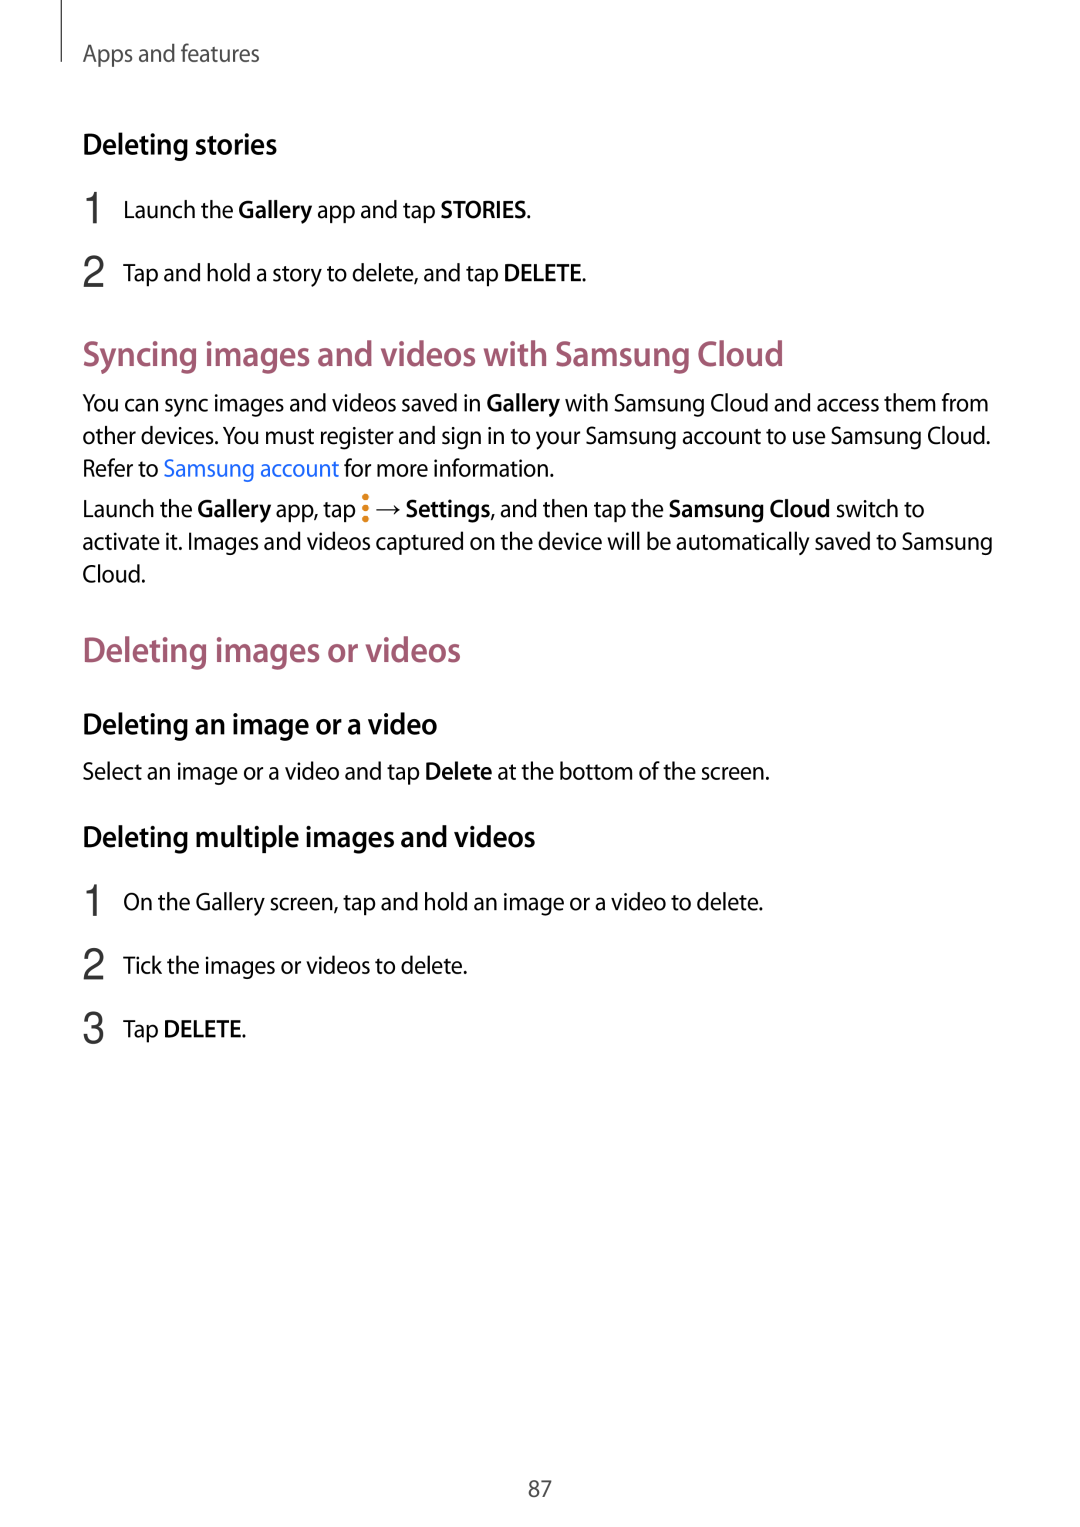 Samsung SM-A320FZDNCOS manual Syncing images and videos with Samsung Cloud, Deleting images or videos, Deleting stories 